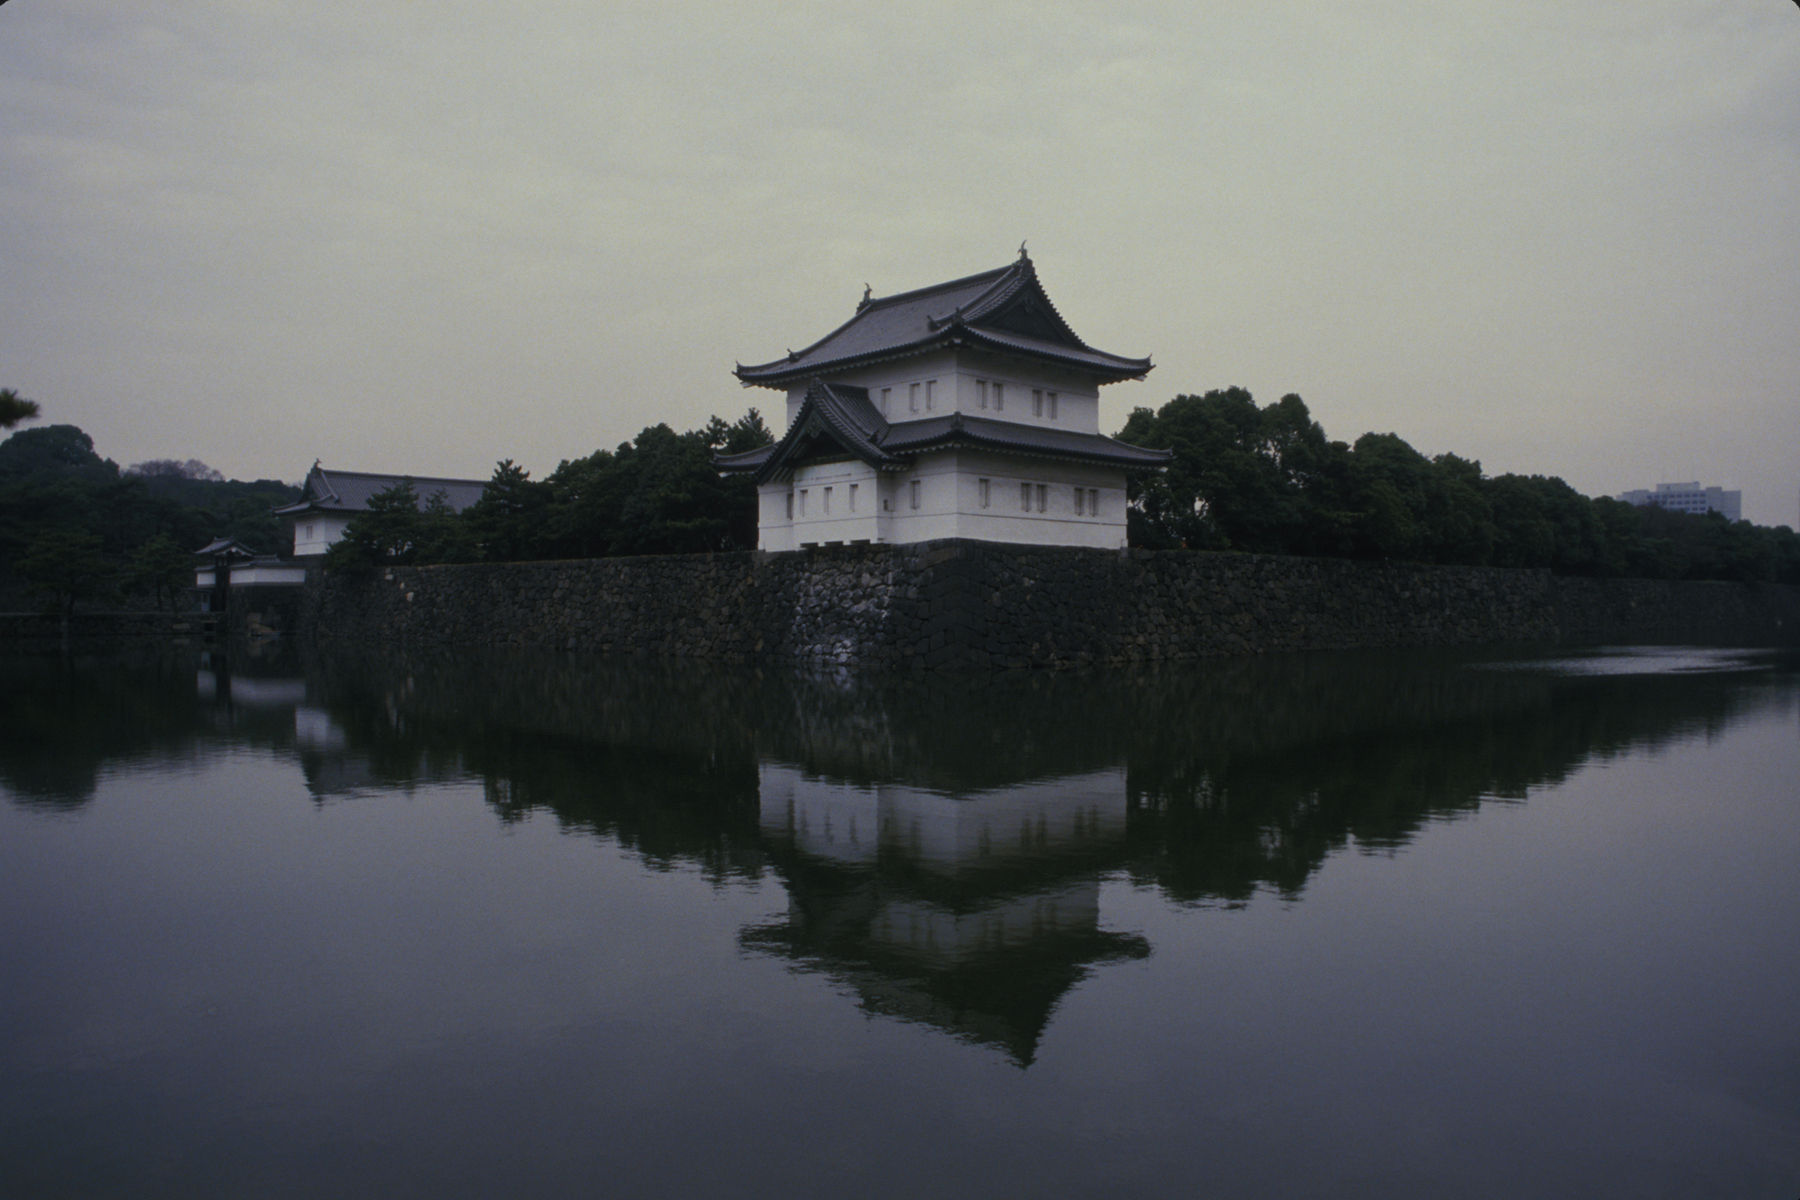 Imperial Palace, Tokyo : Places : Photography by Adam Stoltman: Sports Photography, The Arts, Portraiture, Travel, Photojournalism and Fine Art in New York